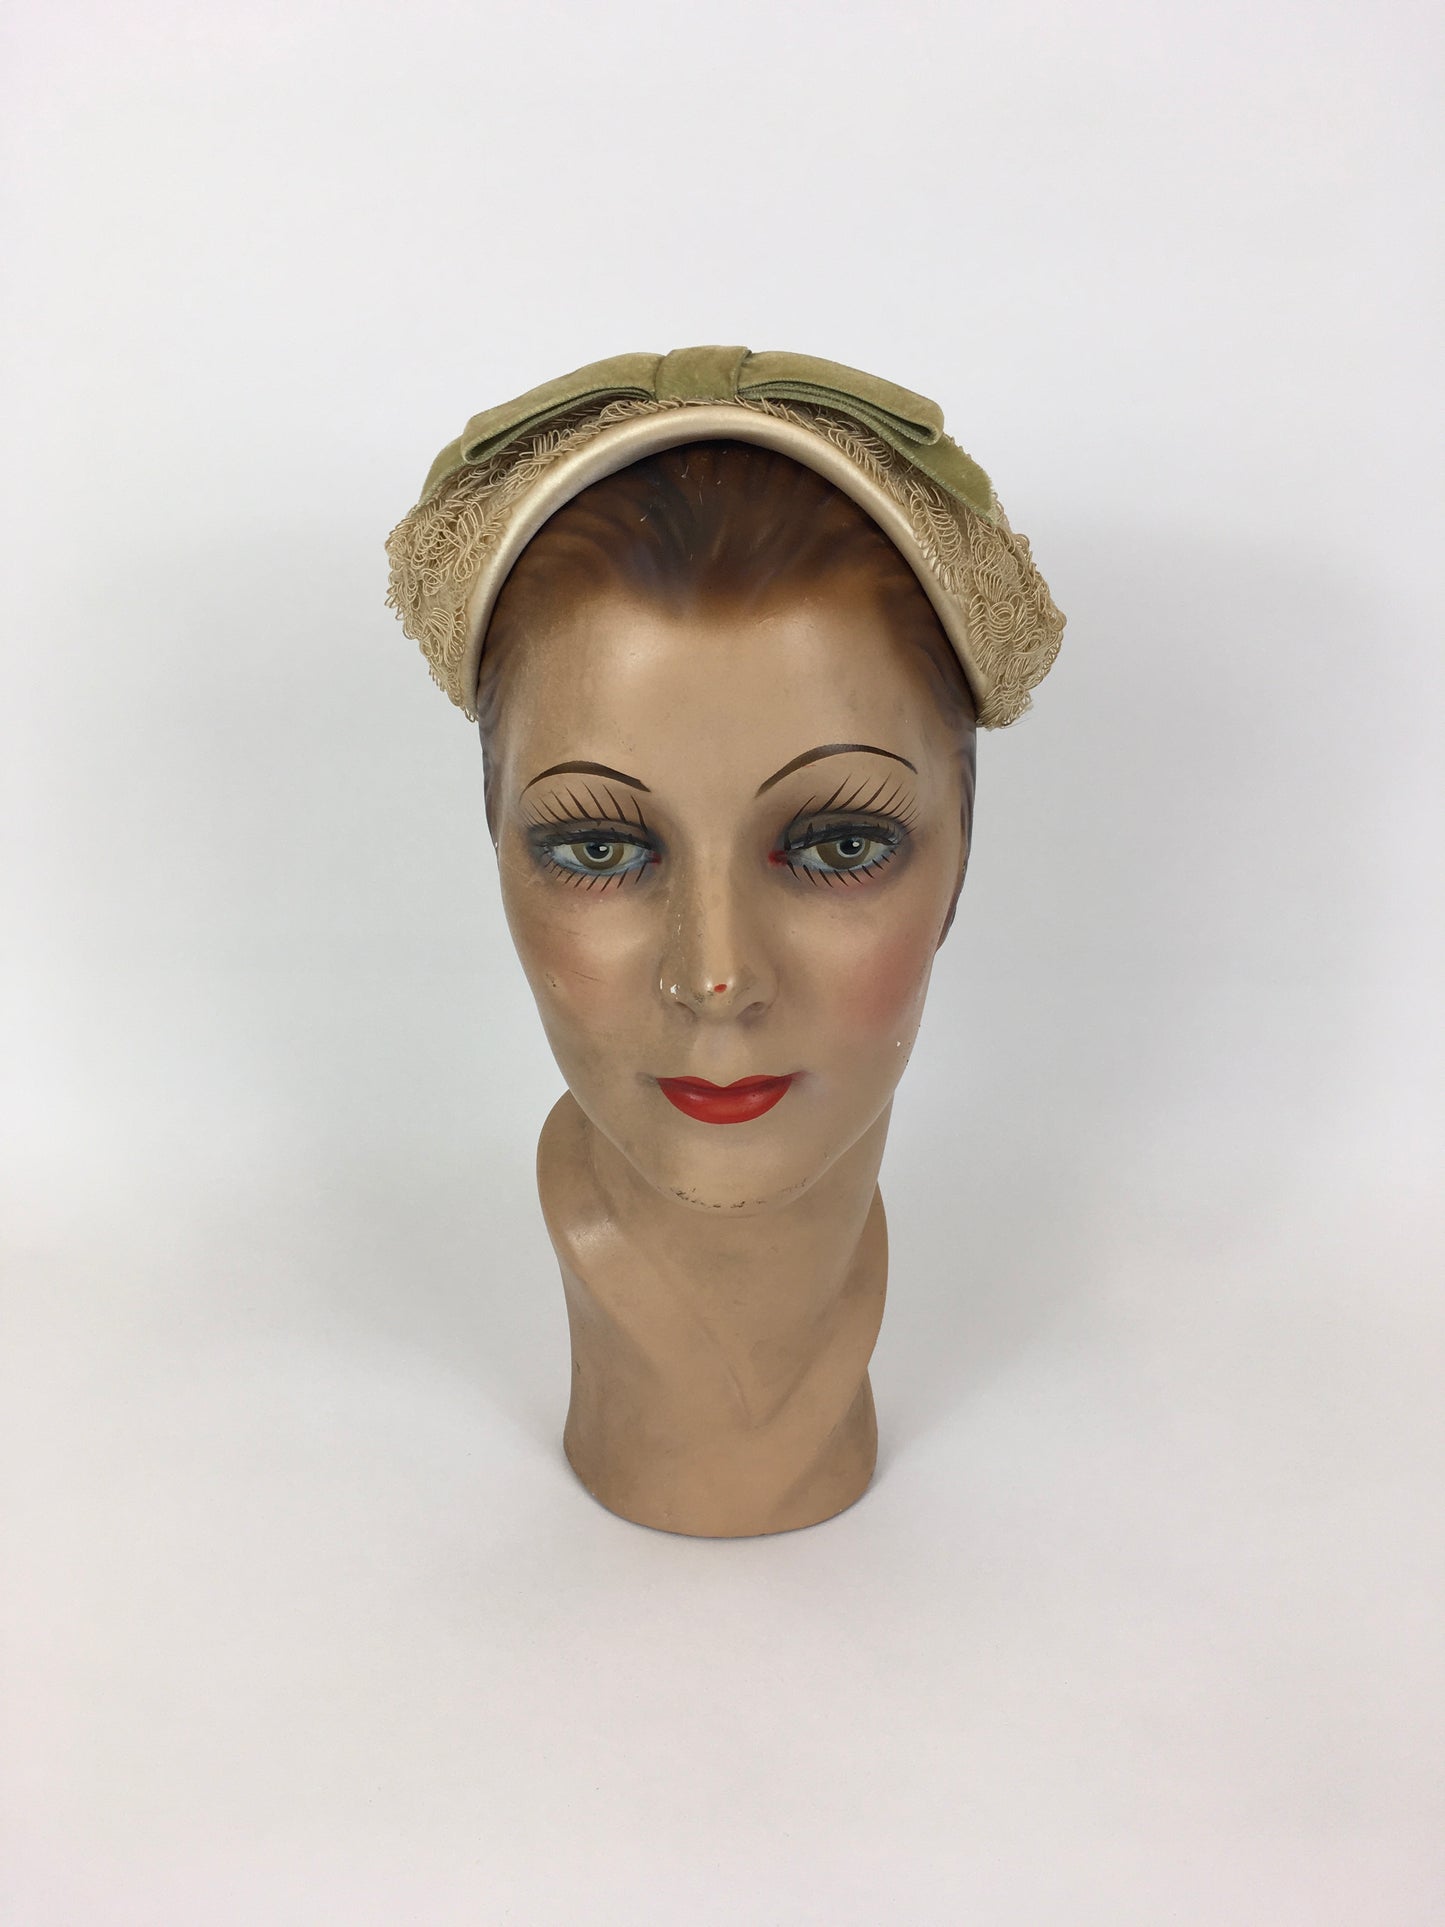 Original 1950’s Darling Headpiece - In A Soft Straw Colour with Contrast Rich Green Velvet Bow Detailing